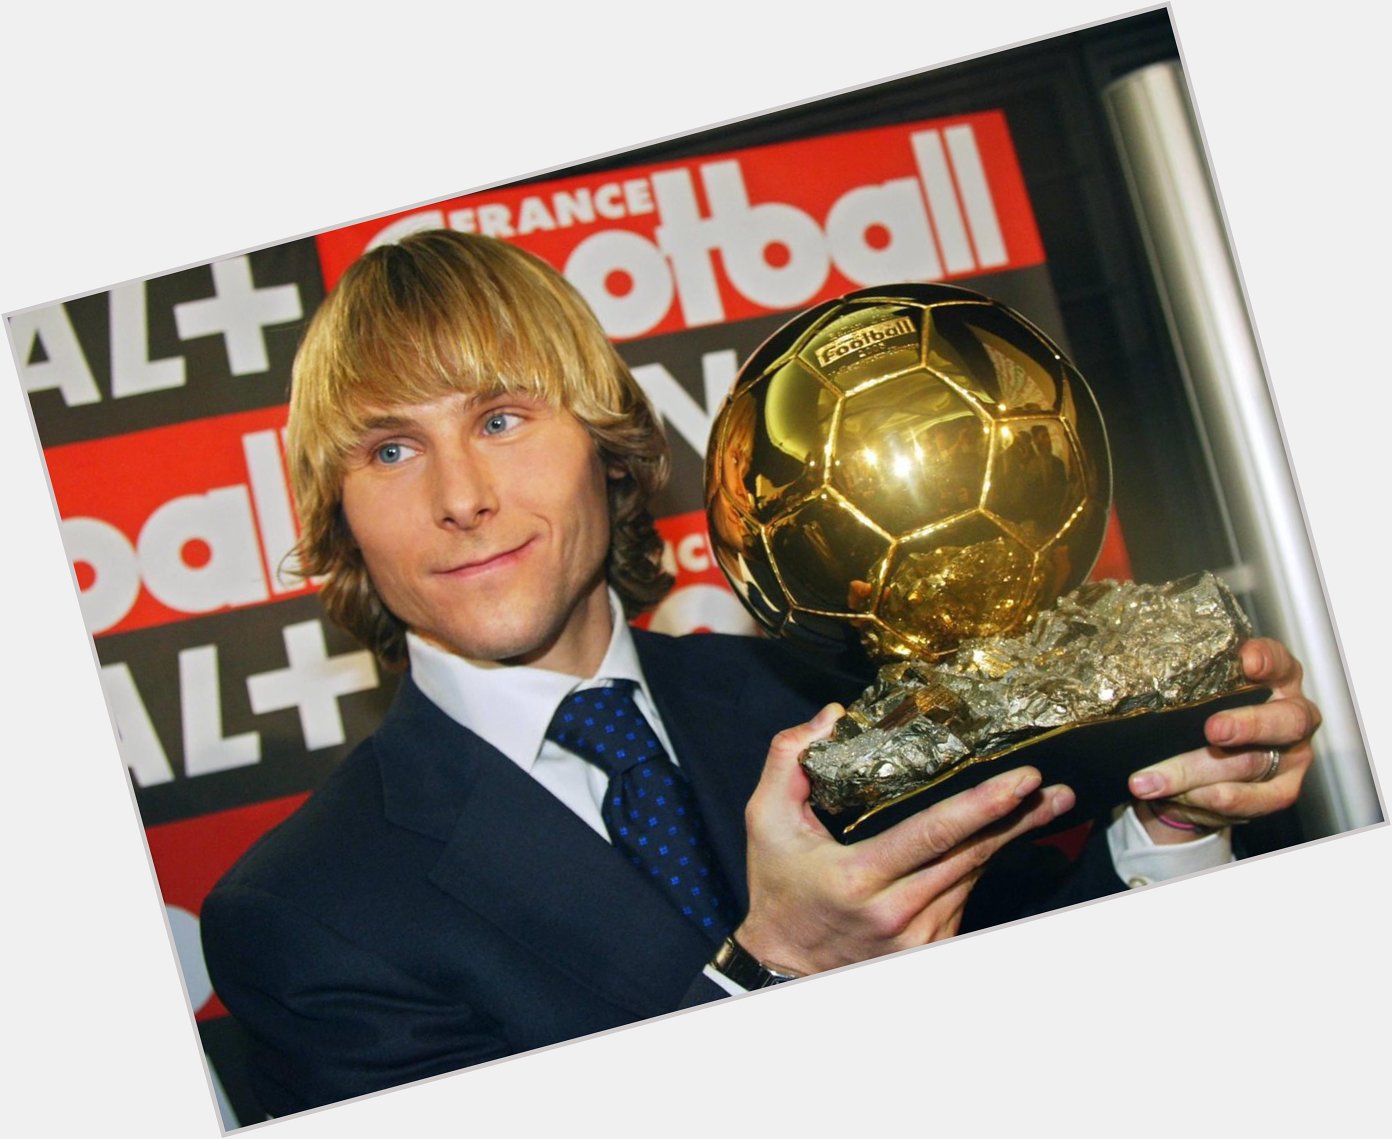 Happy birthday Pavel Nedved! One of the greatest footballers of his generation. A true Cc: 